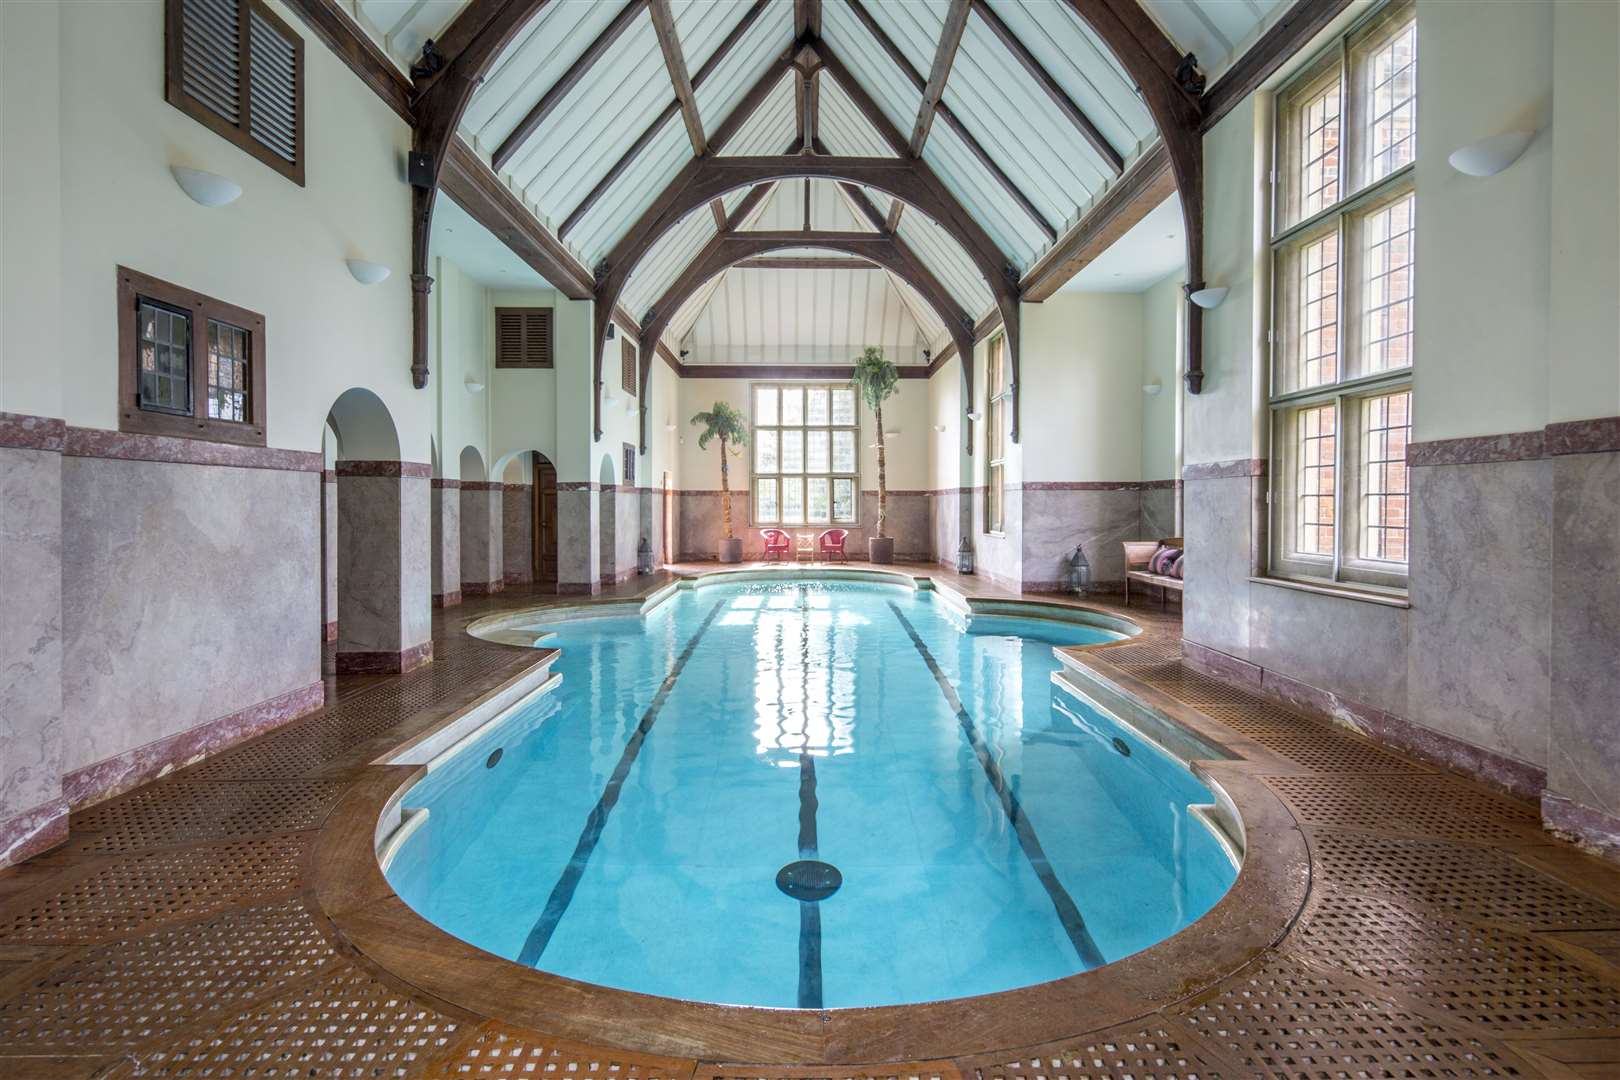 The house features a beautiful 1920s marble swimming pool. Picture: Knight Frank